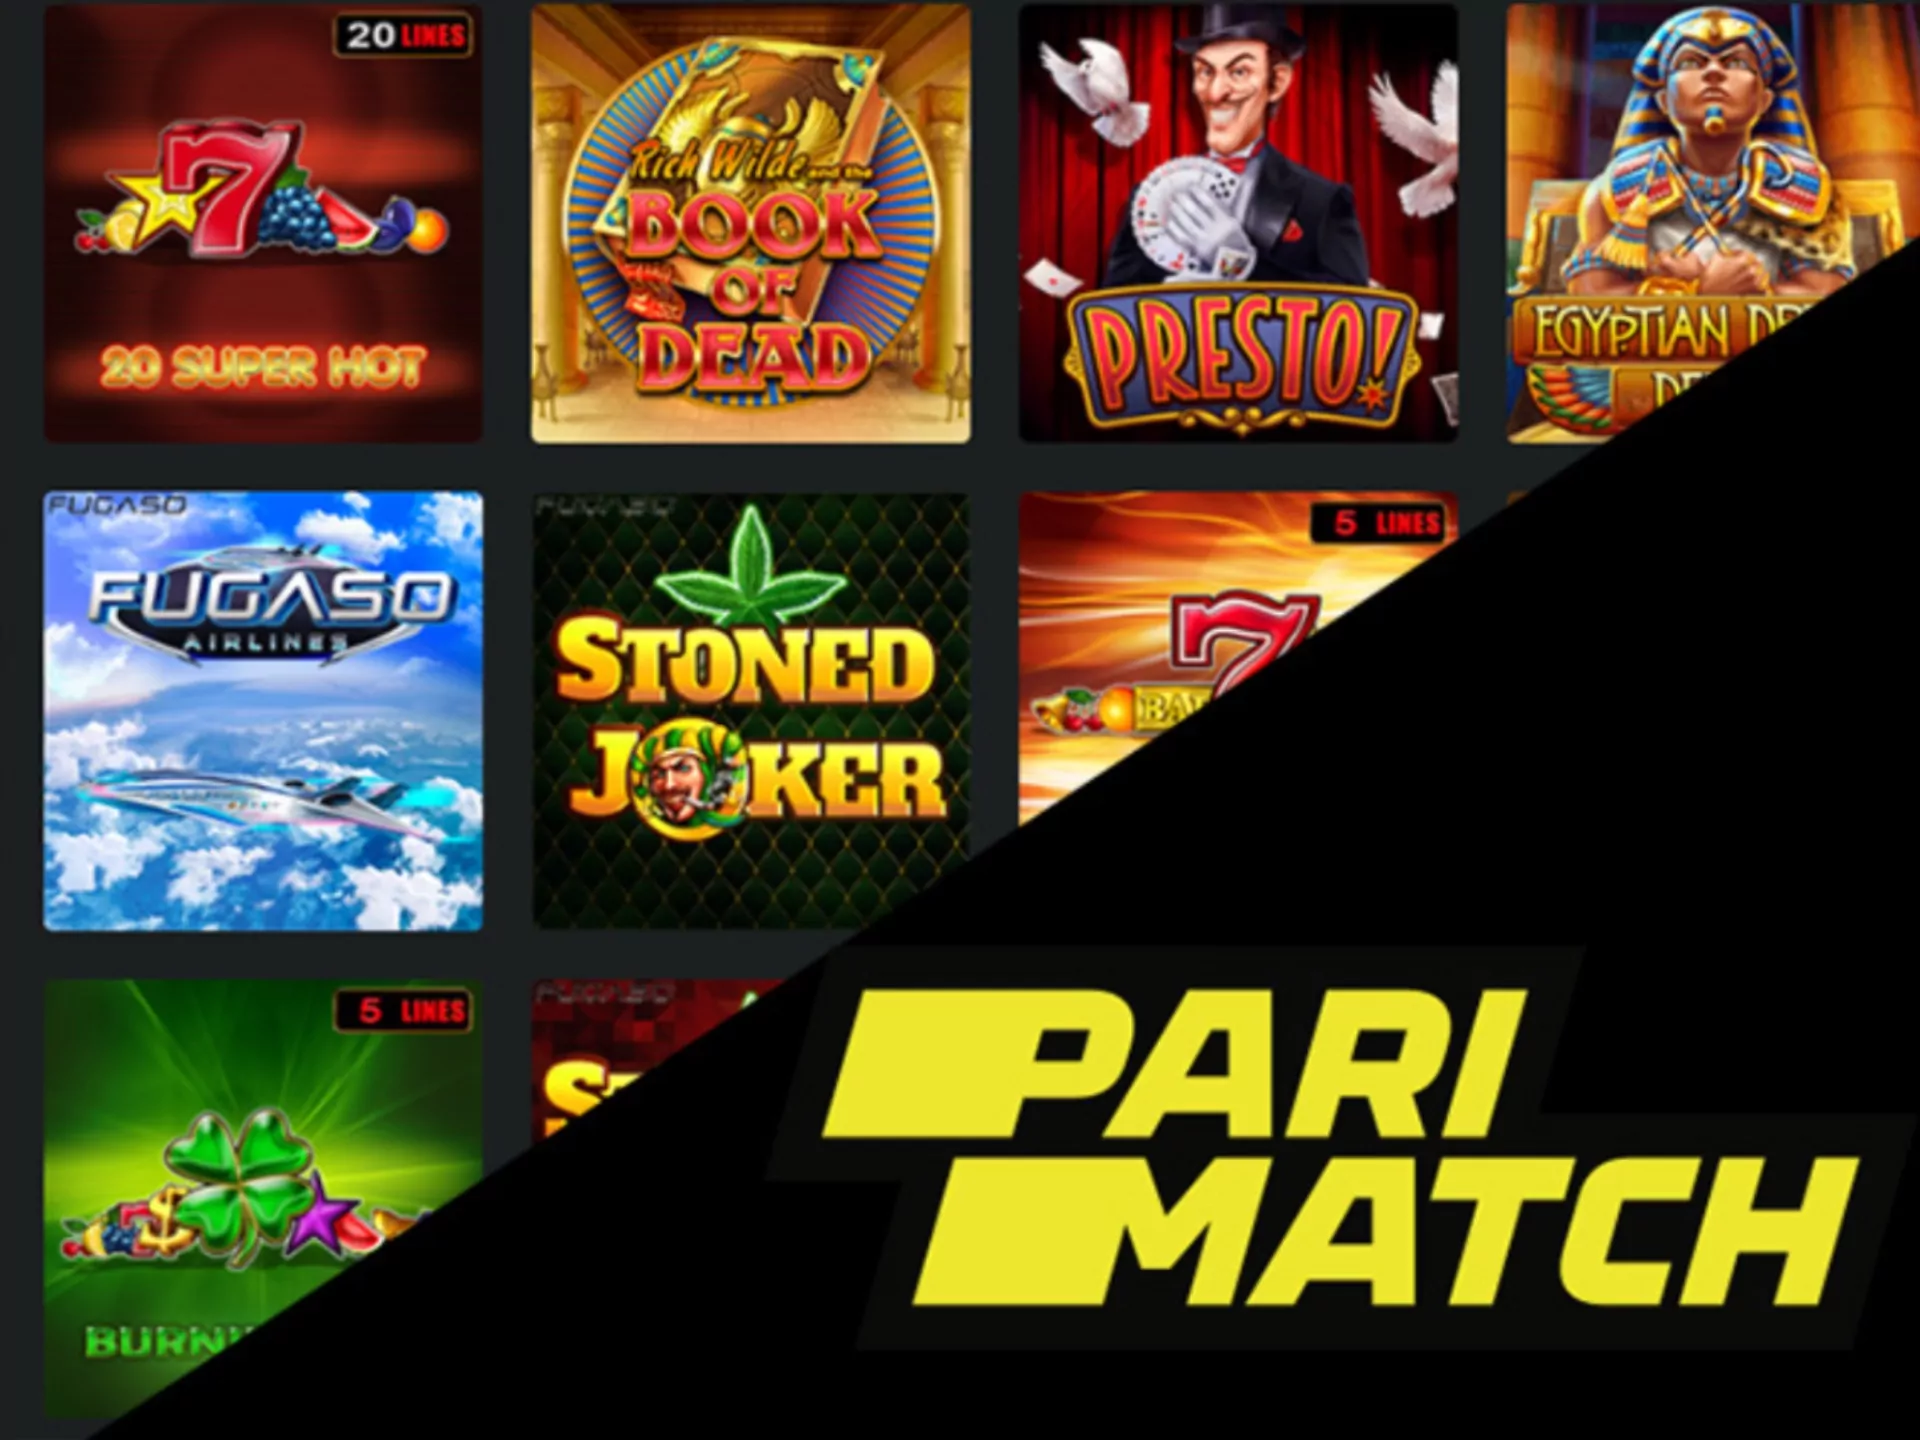 Read the whole article to make a reasonable decision about Parimatch casino.